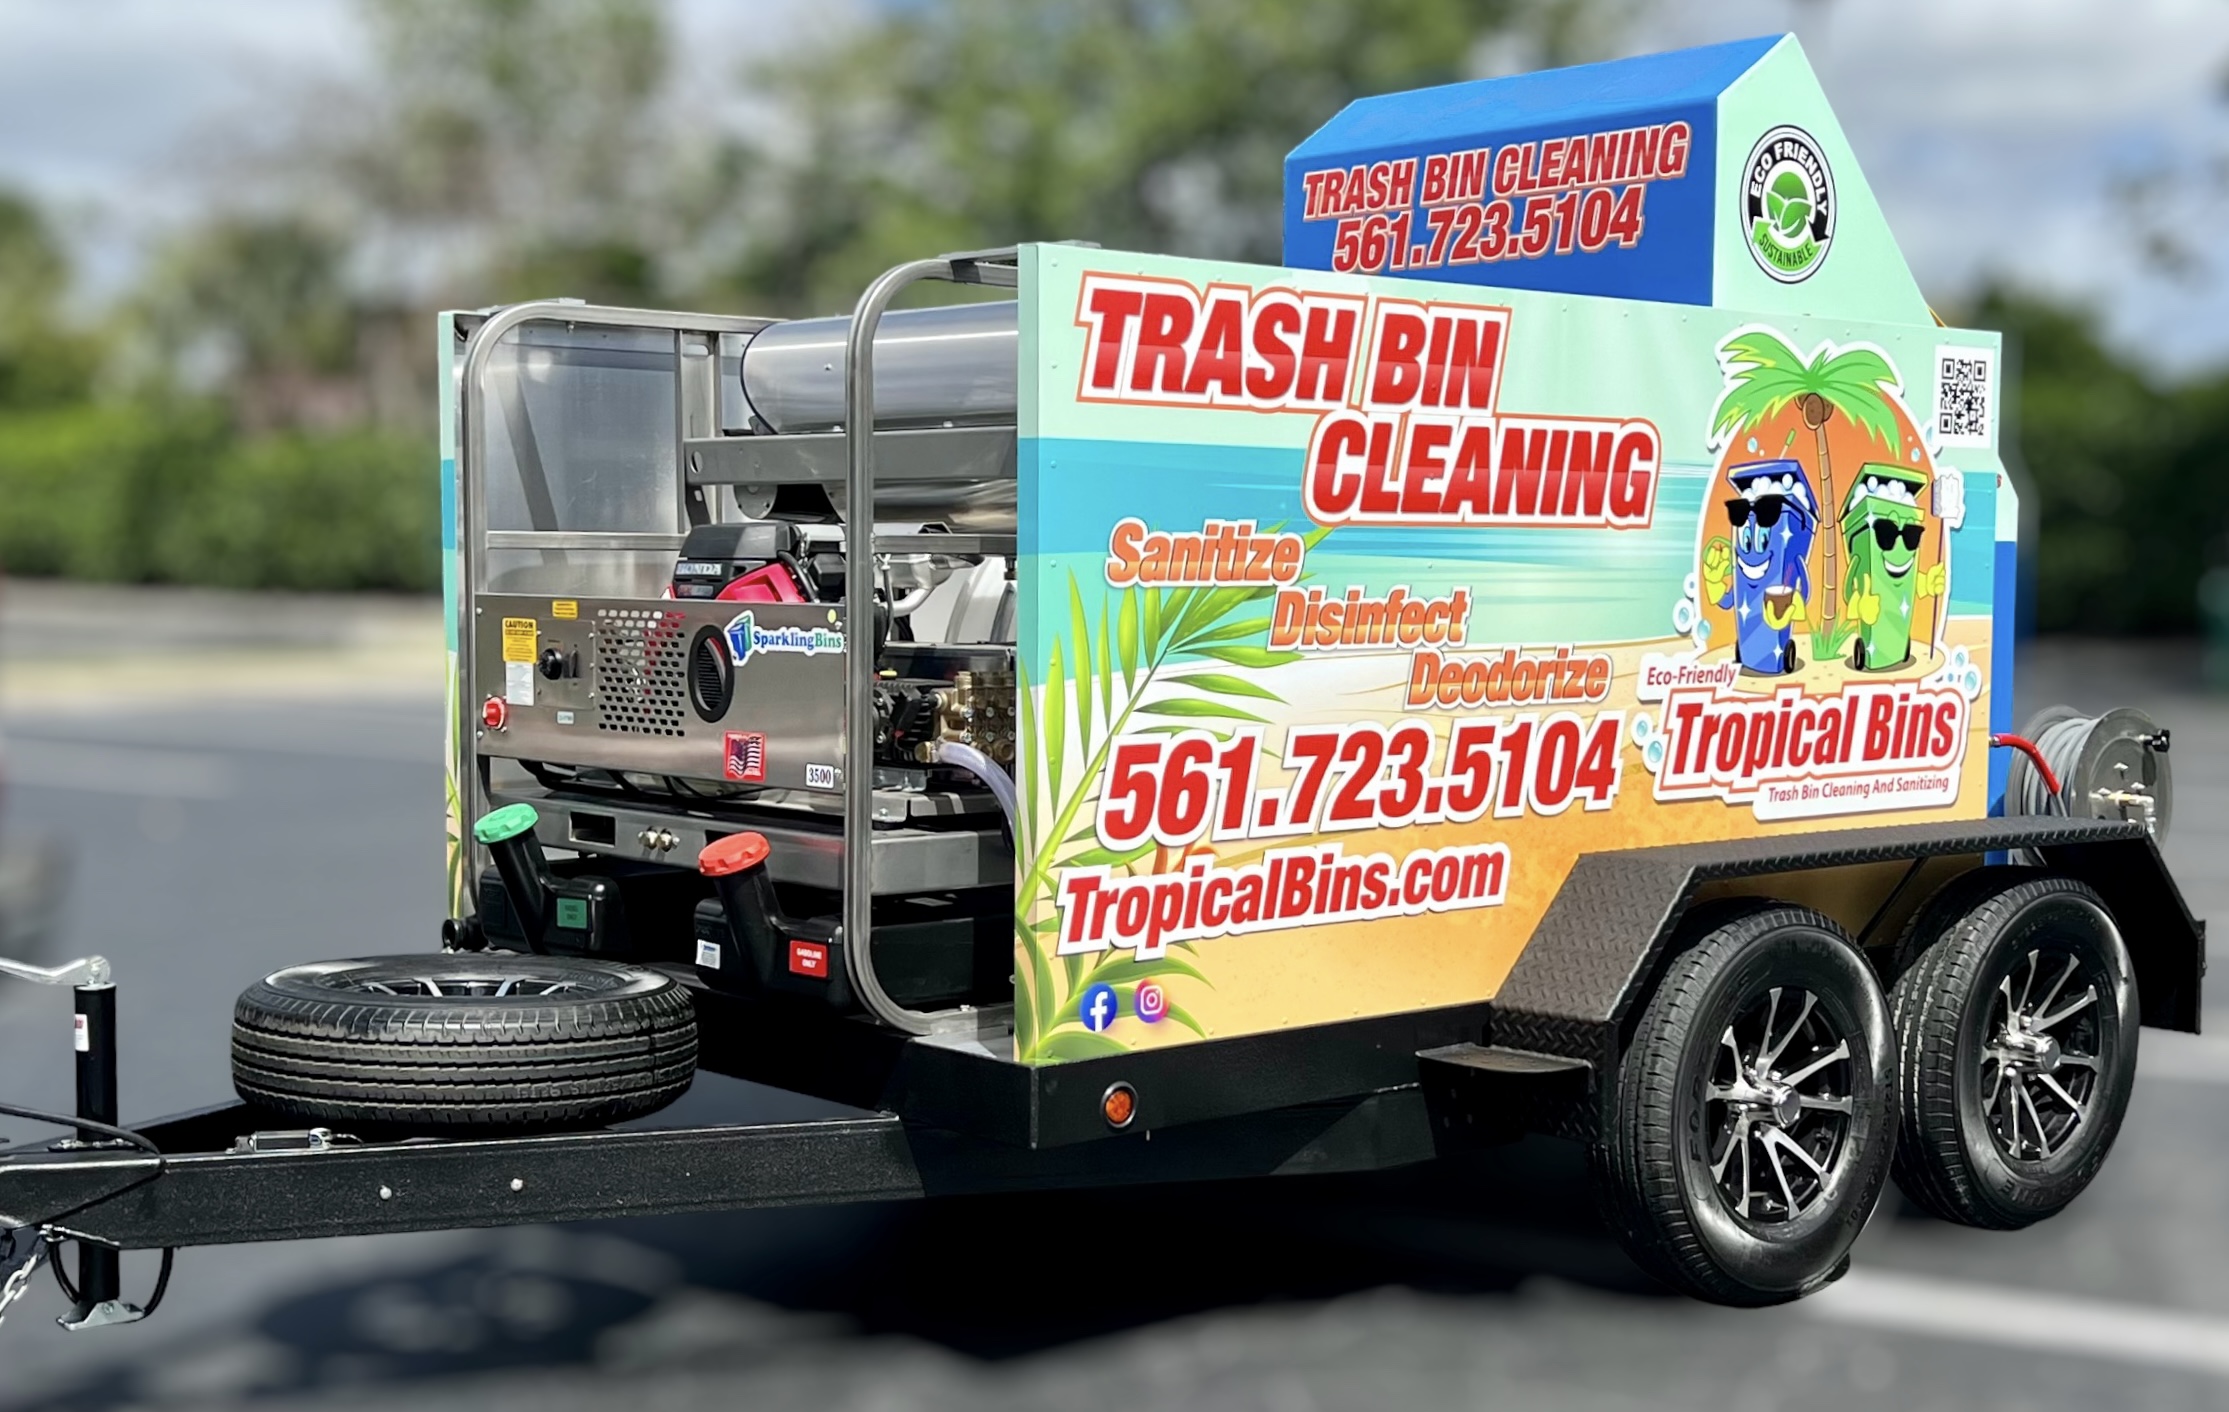 T0169_trash can cleaning trailer